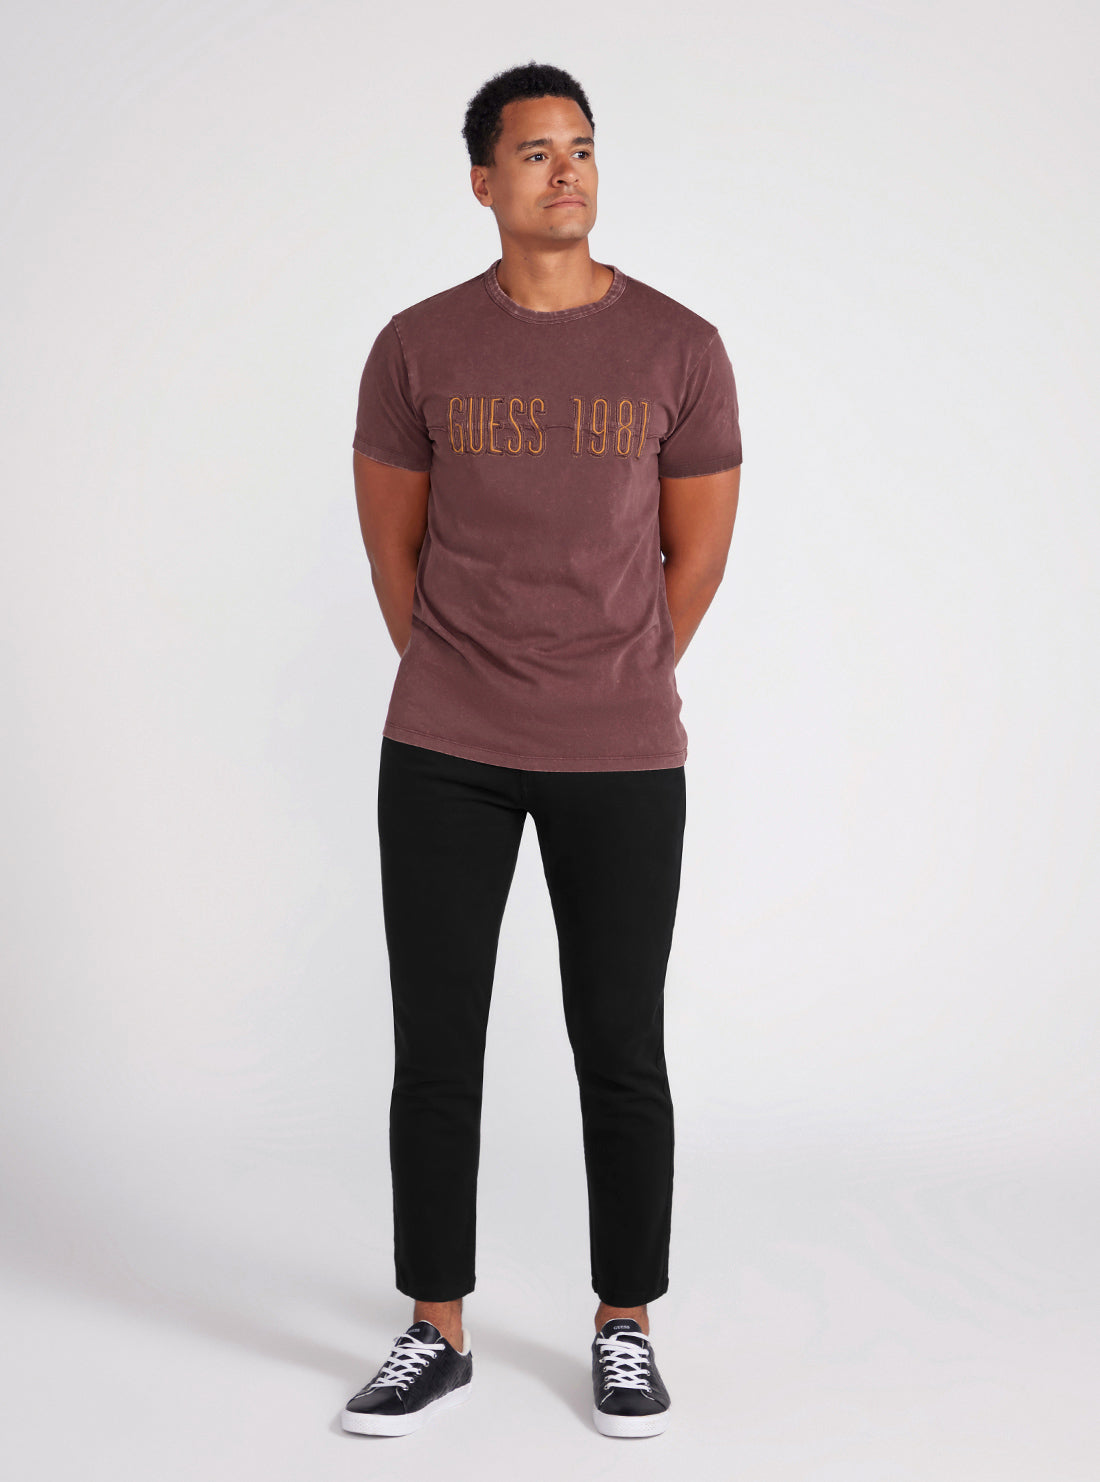 Maroon Embroidered Washed Logo T-Shirt | GUESS Men's apparel | full view